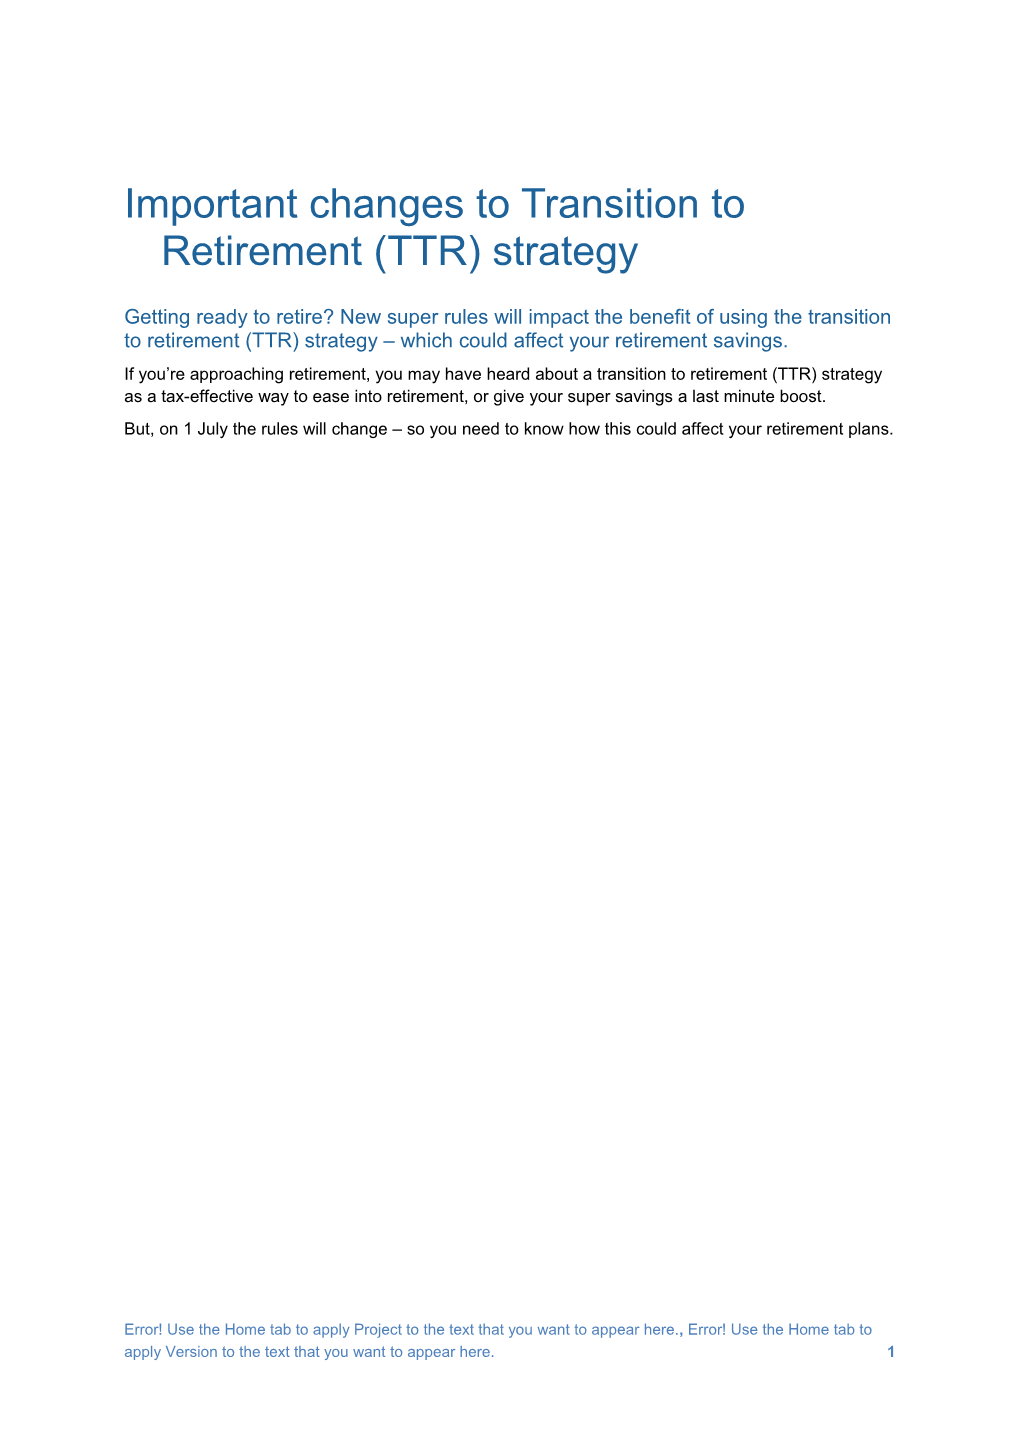 Important Changes to Transition to Retirement (TTR) Strategy